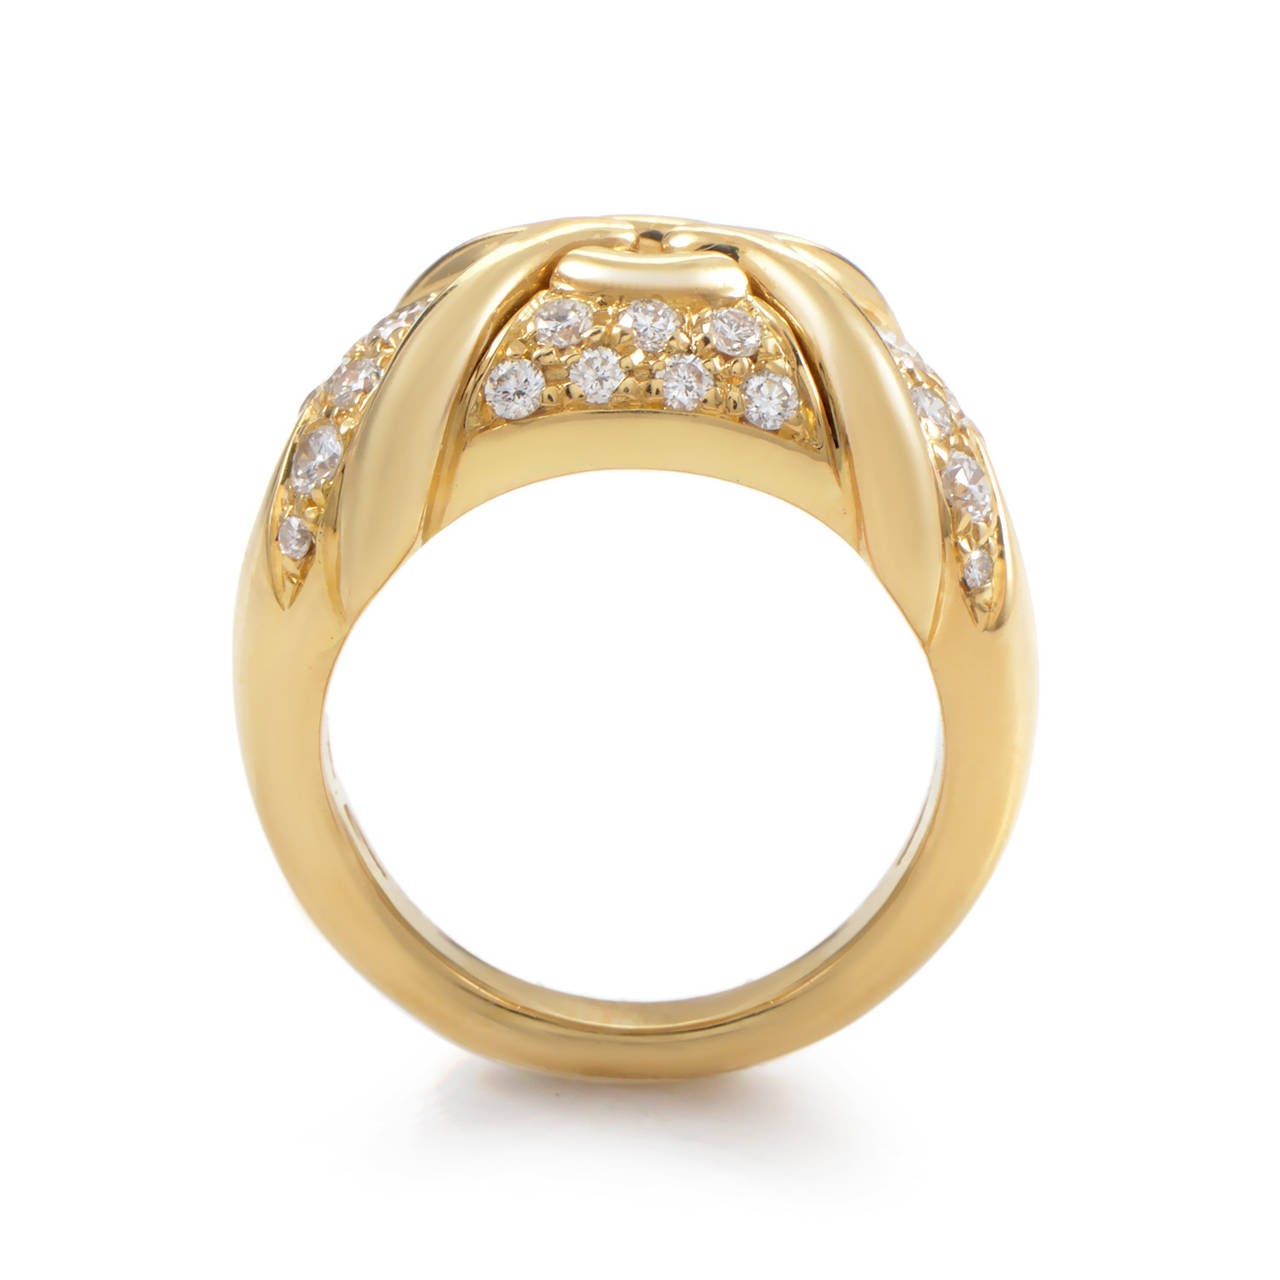 This gorgeously crafted piece of fine jewelry from Bulgari shines with the ethereal glow of precious gemstones. The ring is made of 18K yellow gold and is set with a lovely .75 carat diamond pave.
Included Items: Manufacturer's Box
Ring Size: 5.25